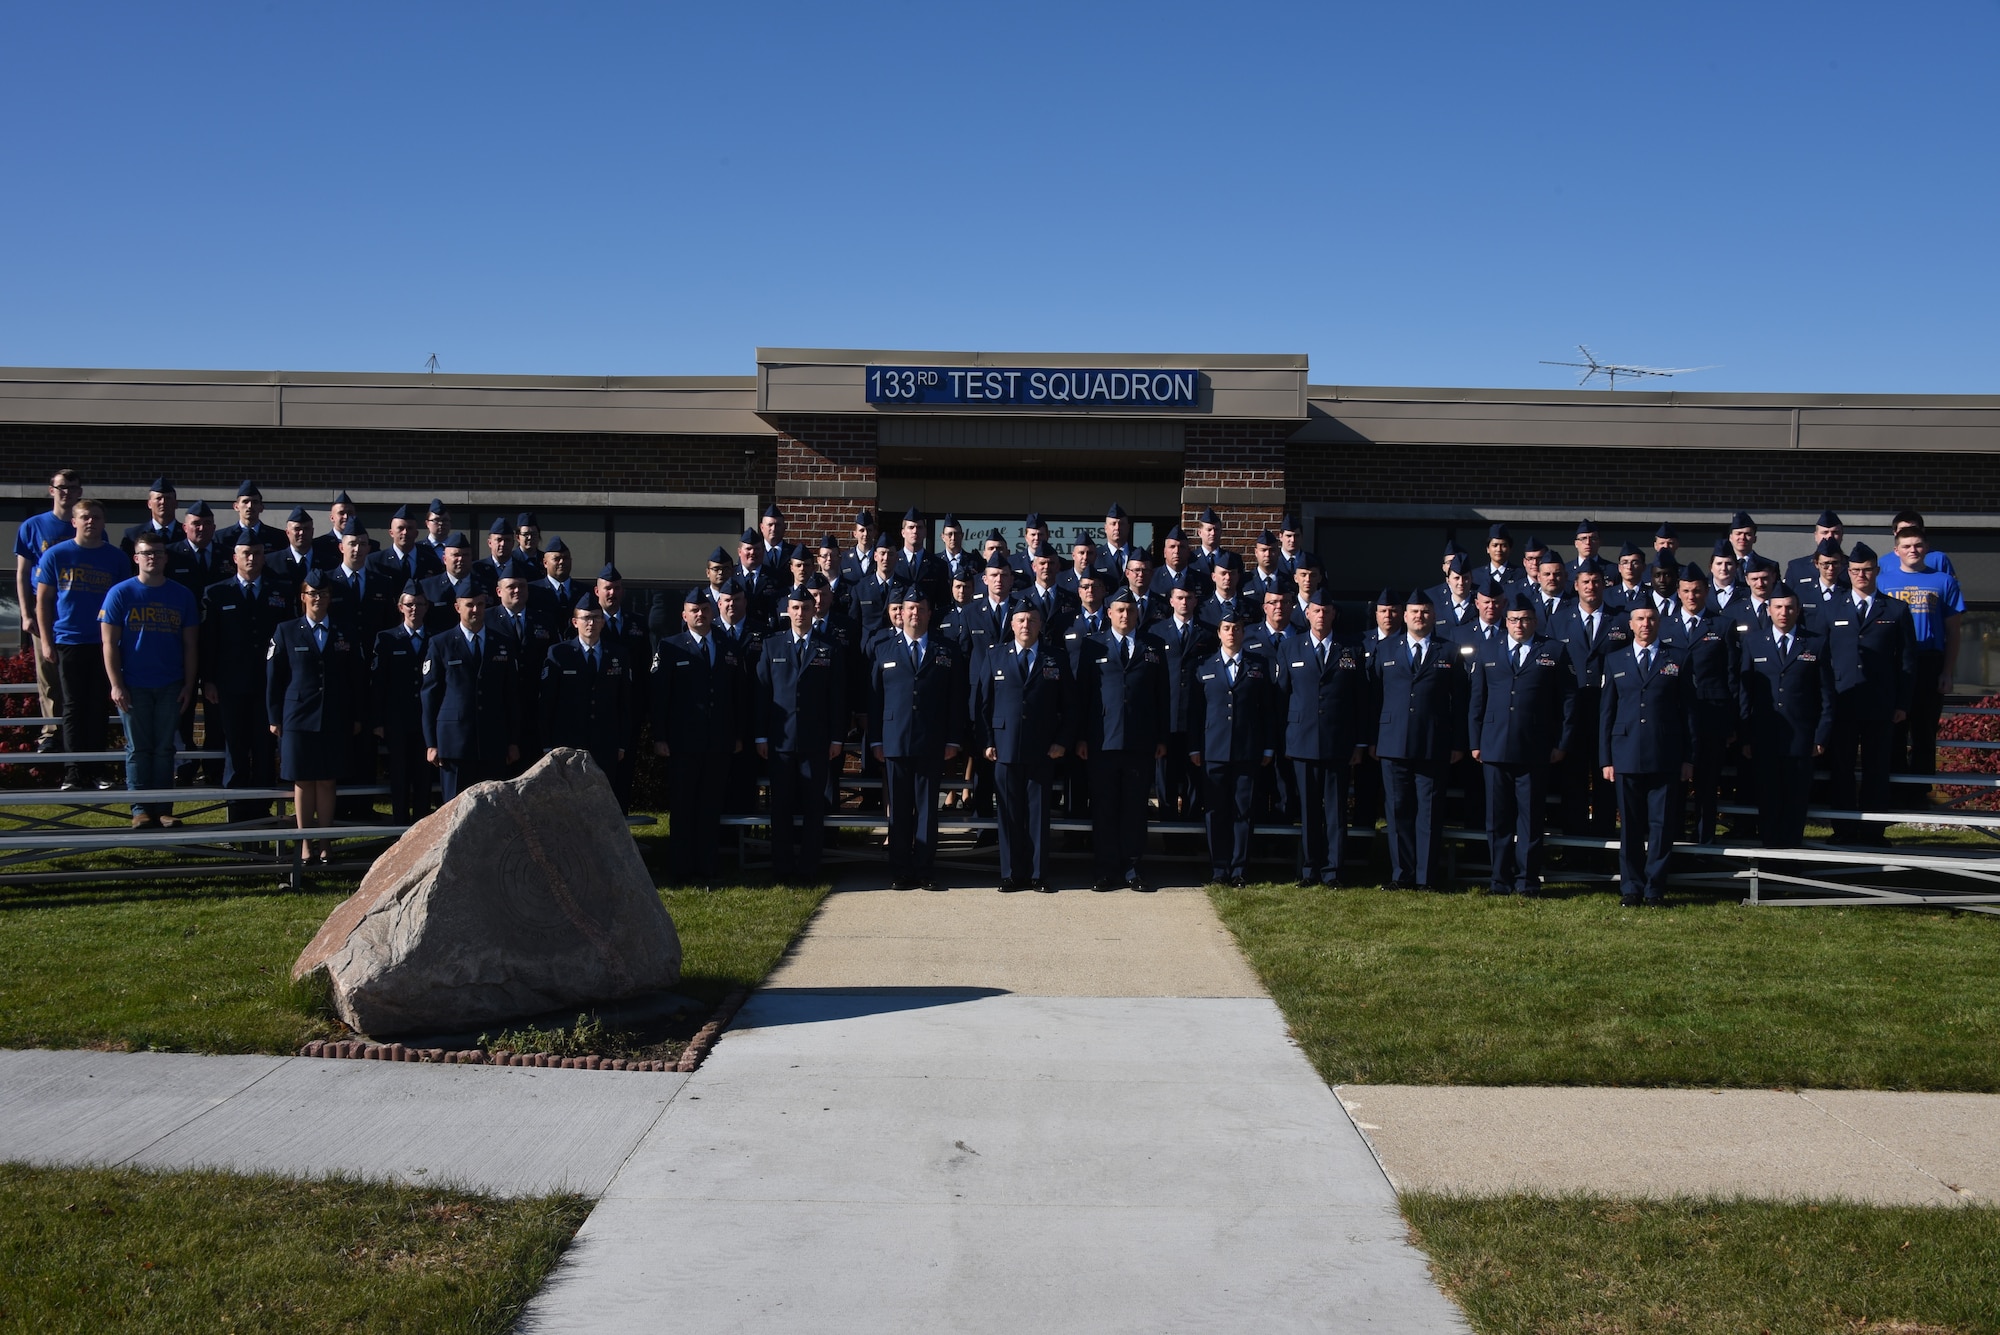 Airmen of the 133rd Test Squadron pose for a photo